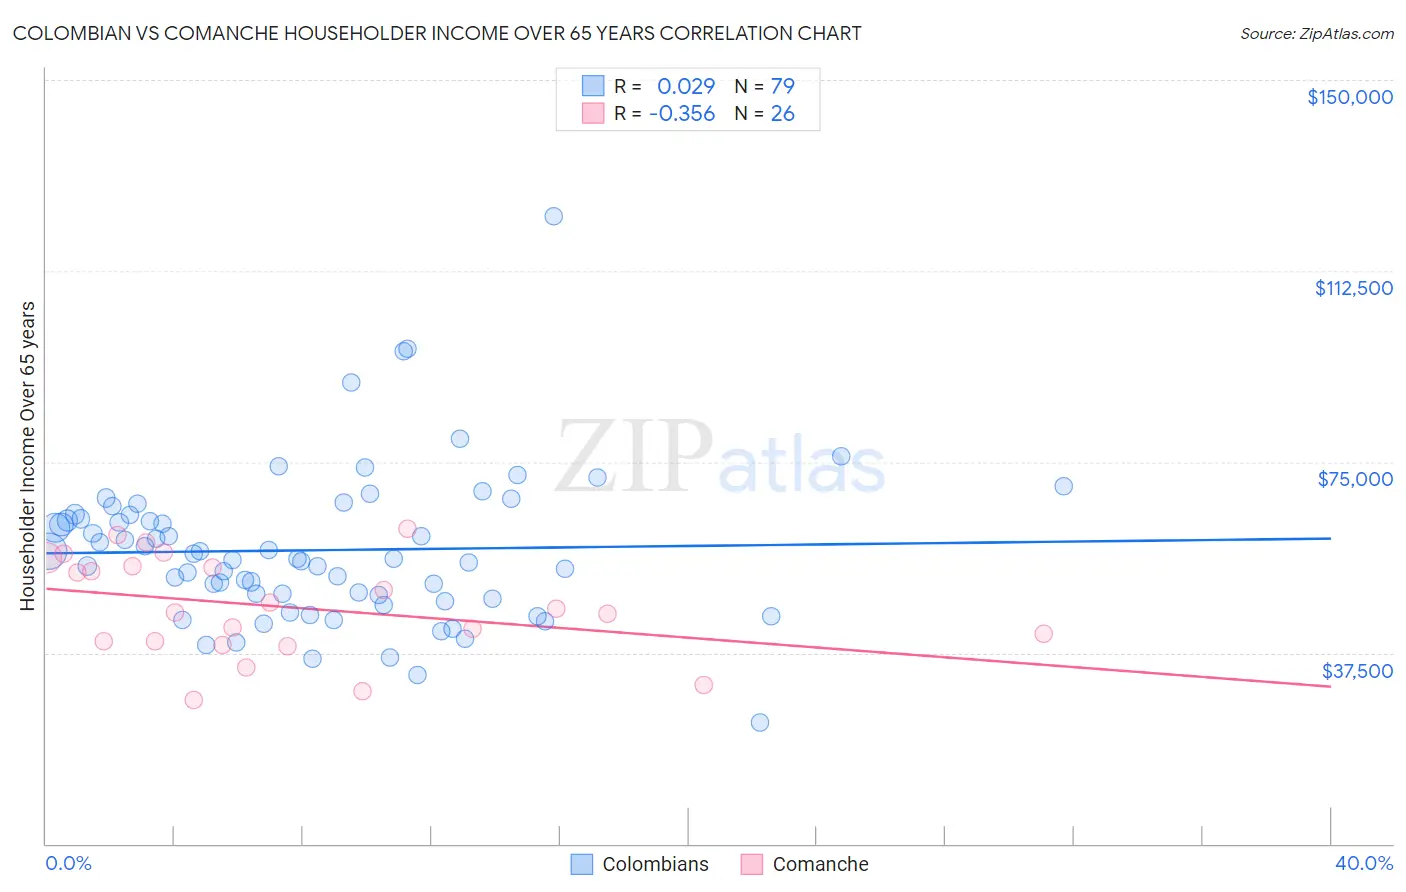 Colombian vs Comanche Householder Income Over 65 years